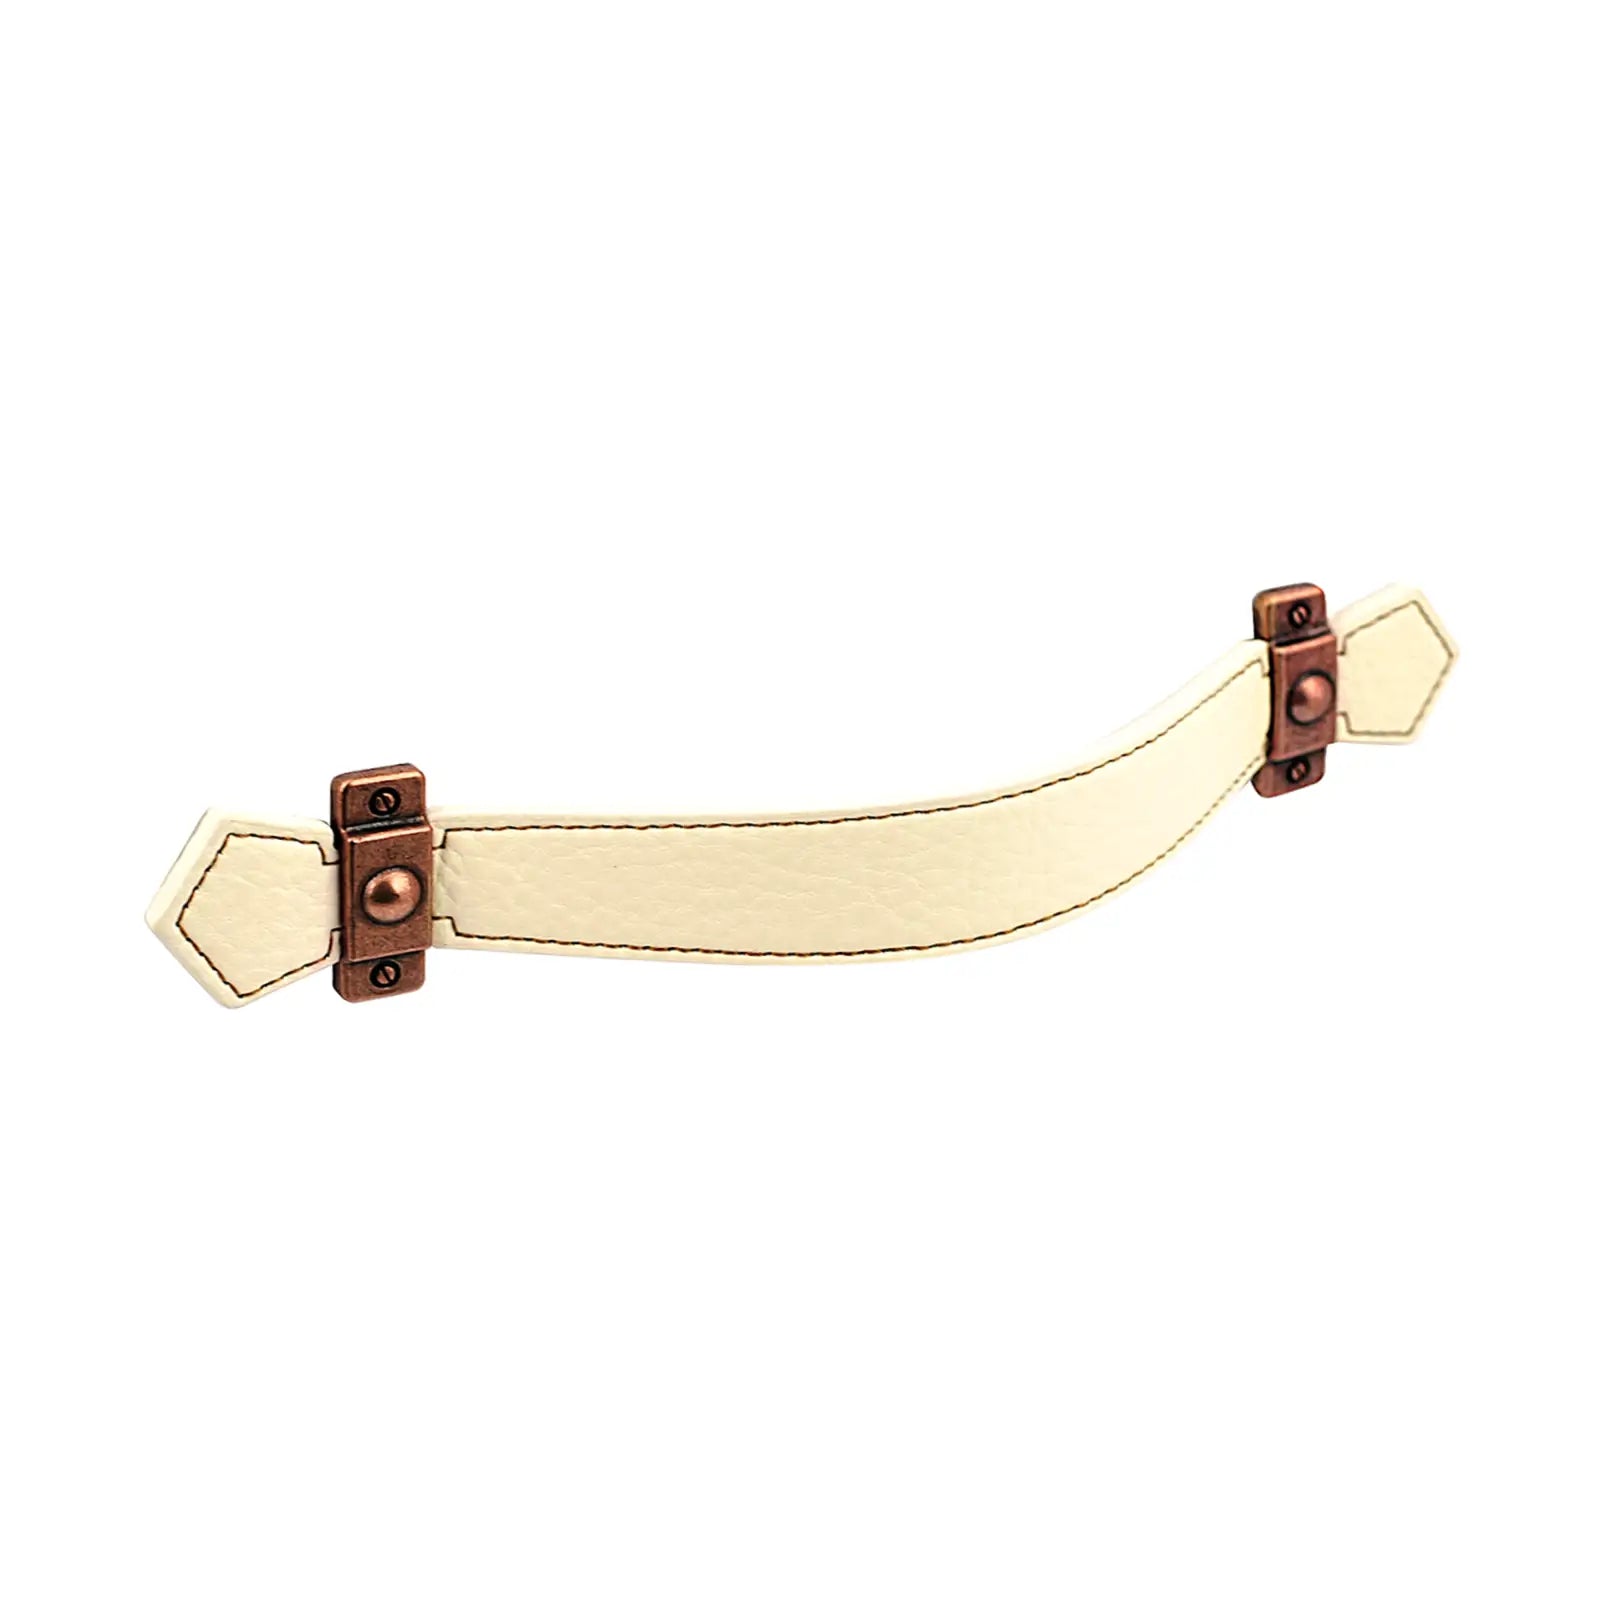 Leather Cabinet Pulls and Strap Handles To Match - Decor And Decor